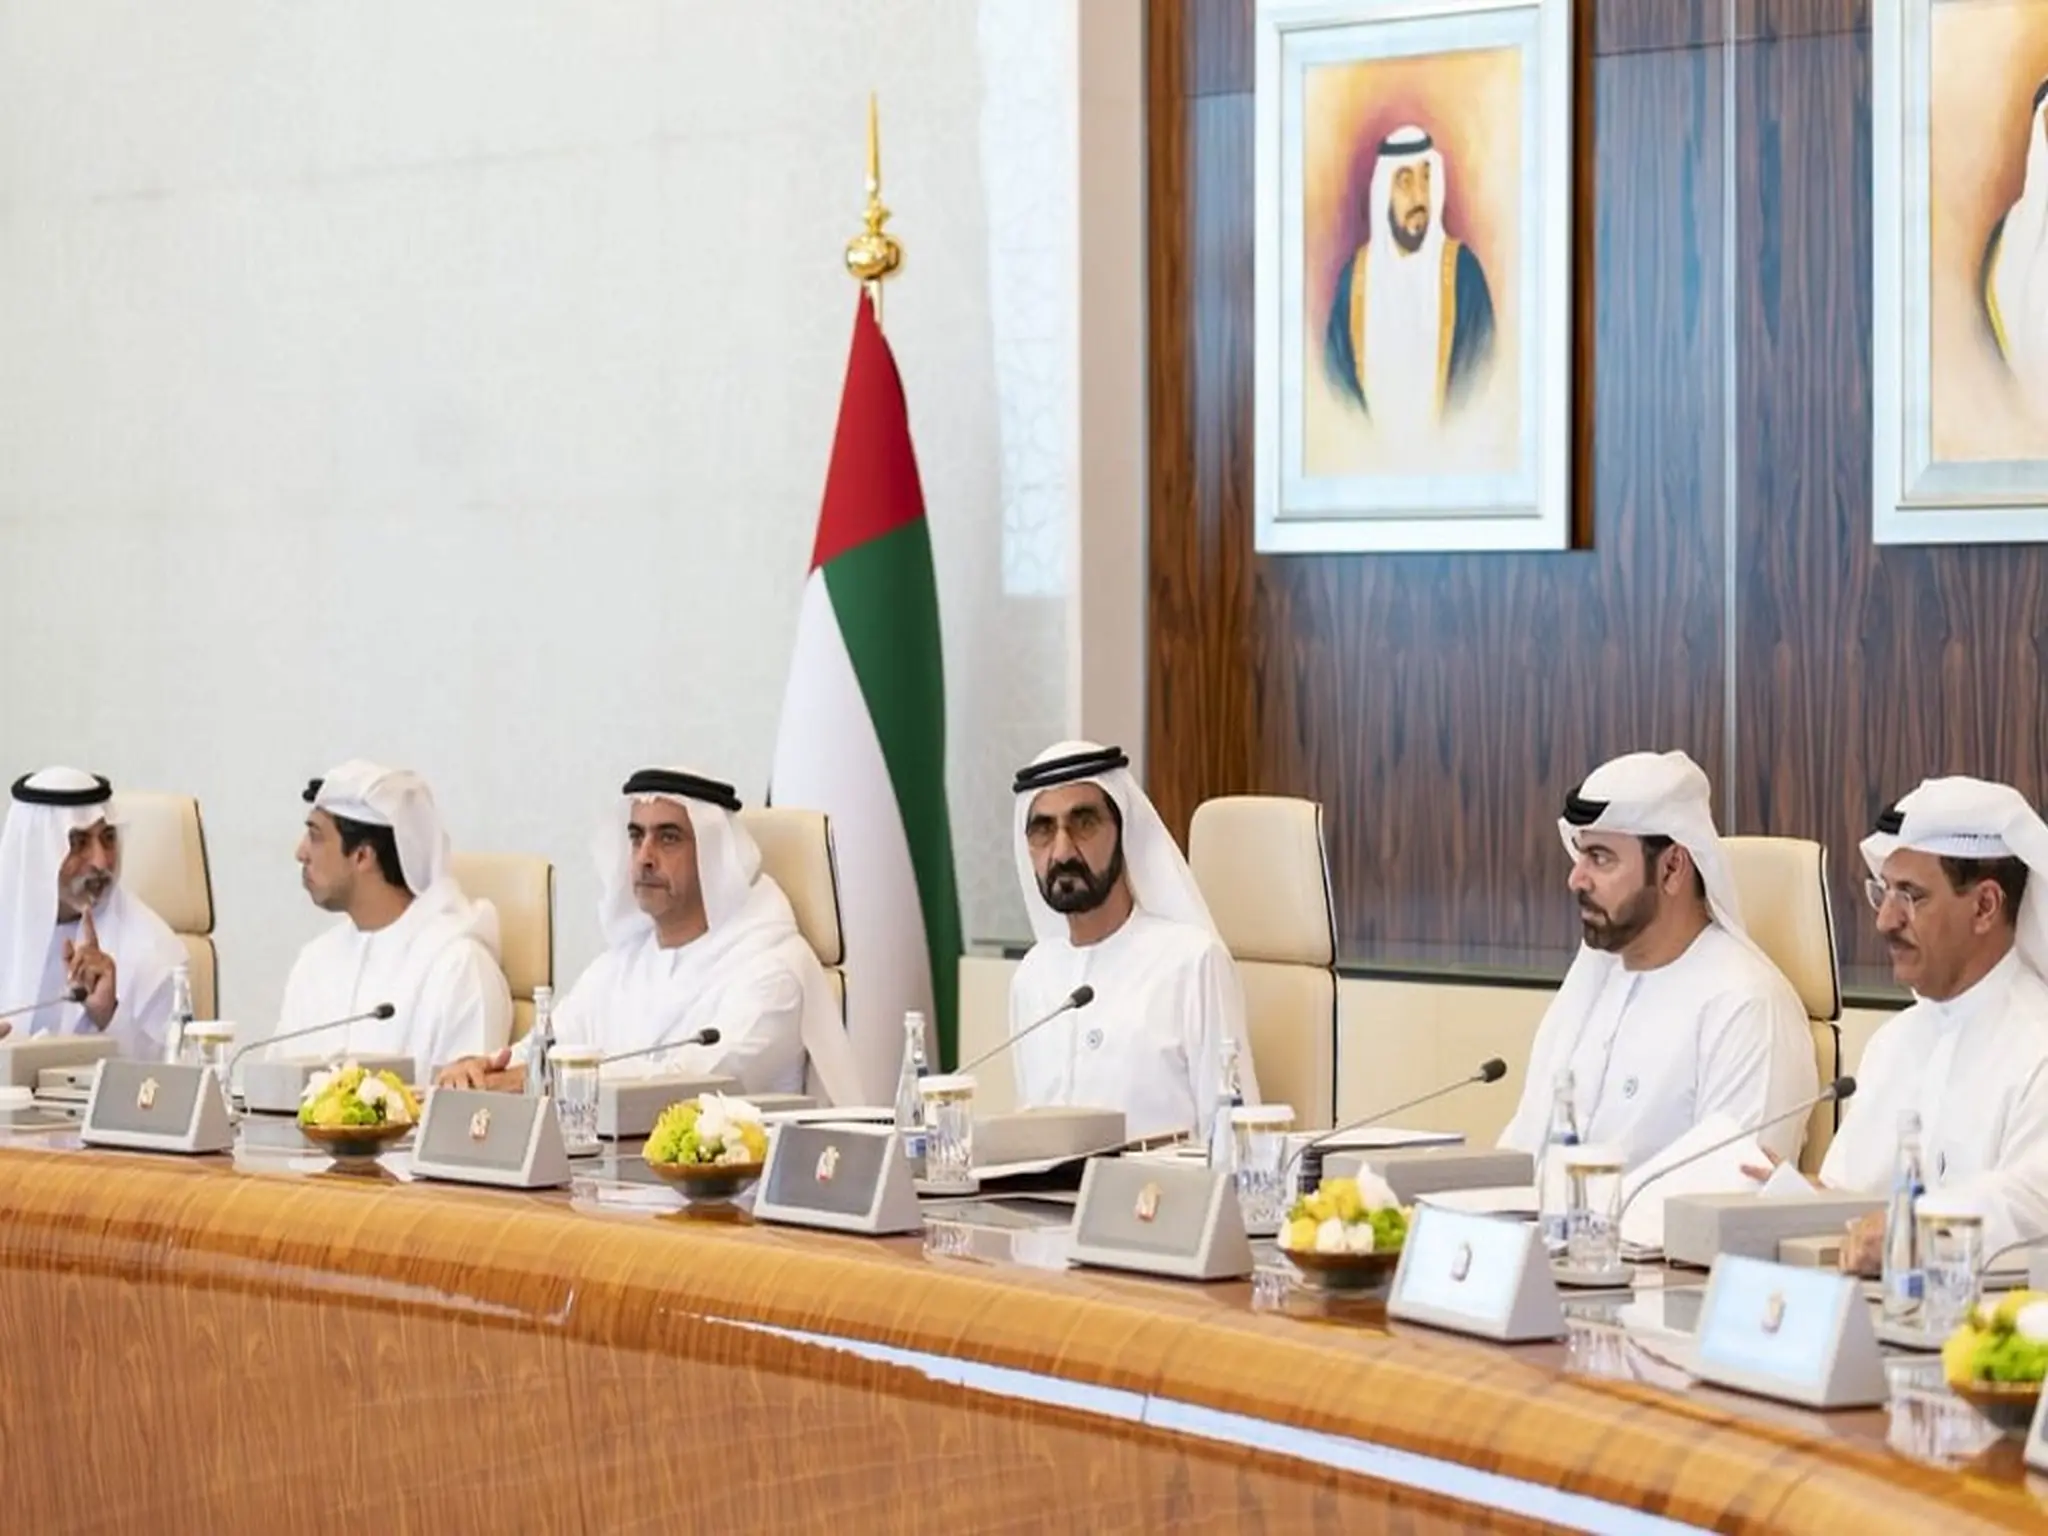 UAE Opening the first phase of electronic registration to promote work in the private sector